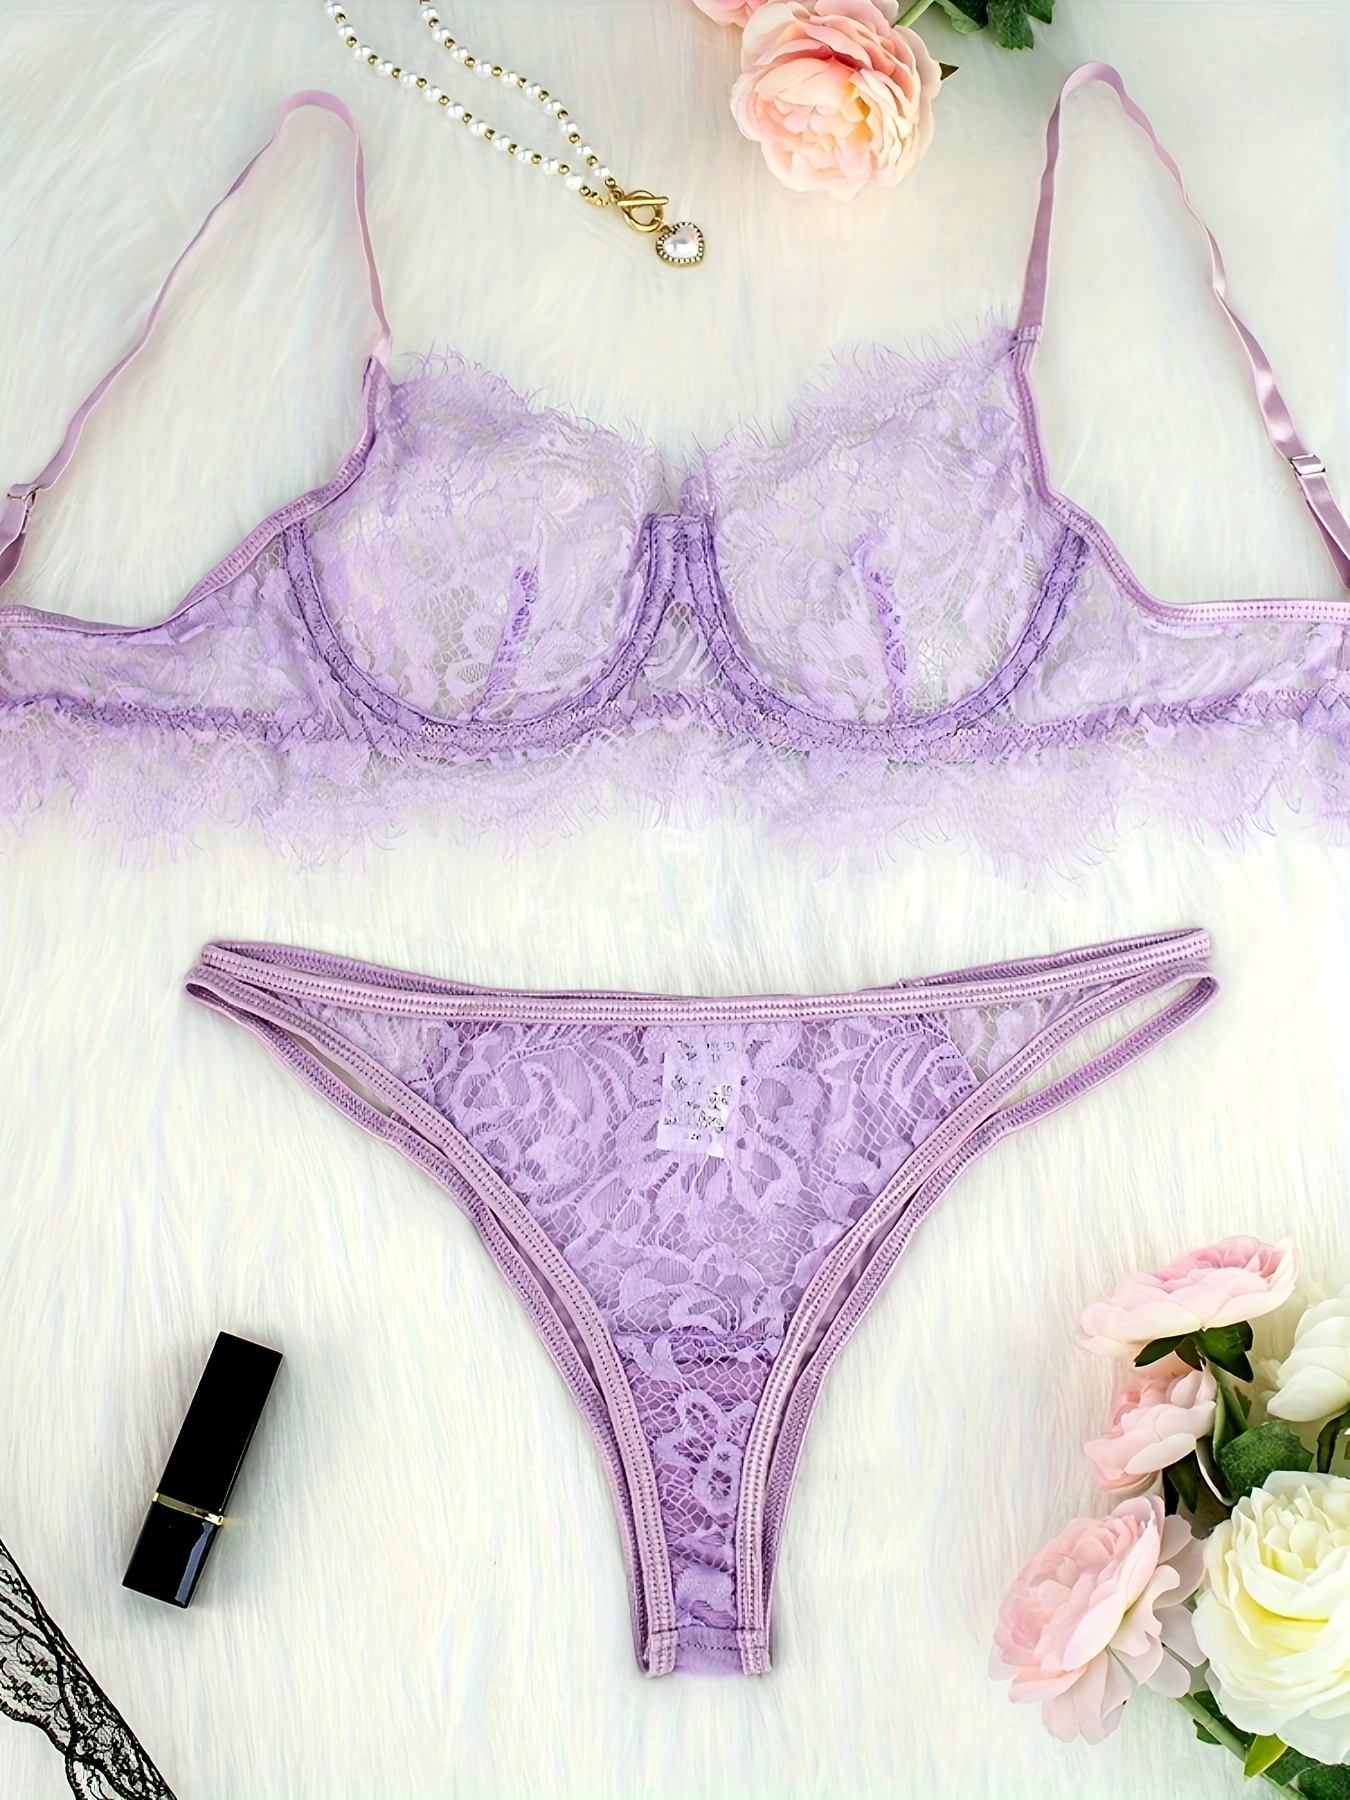 Lavender & Lace Lingerie and Accessories